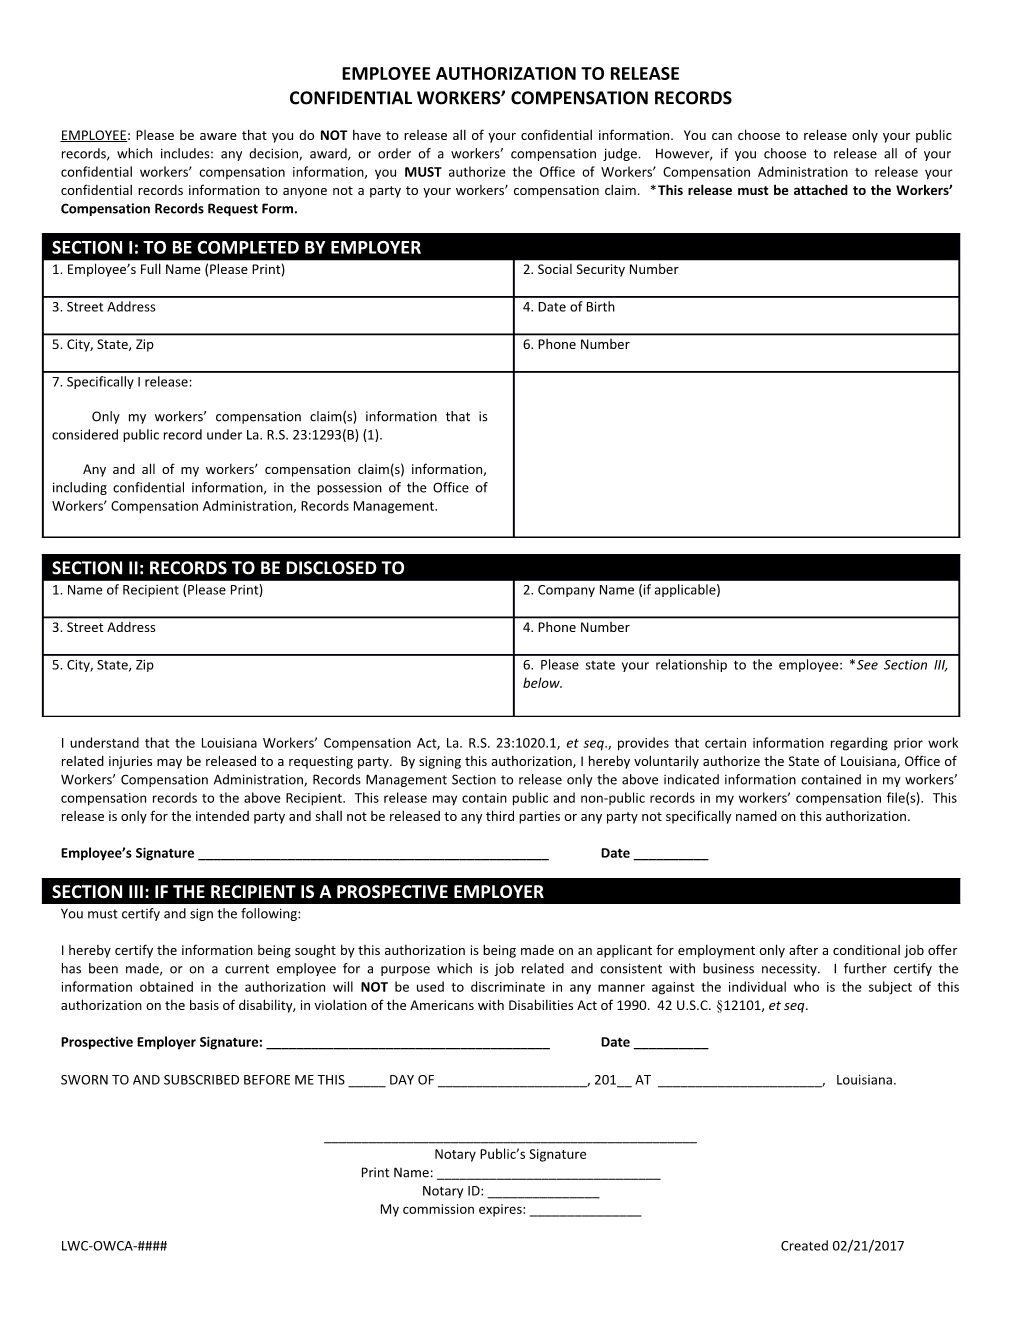 Confidential Workers Compensation Records